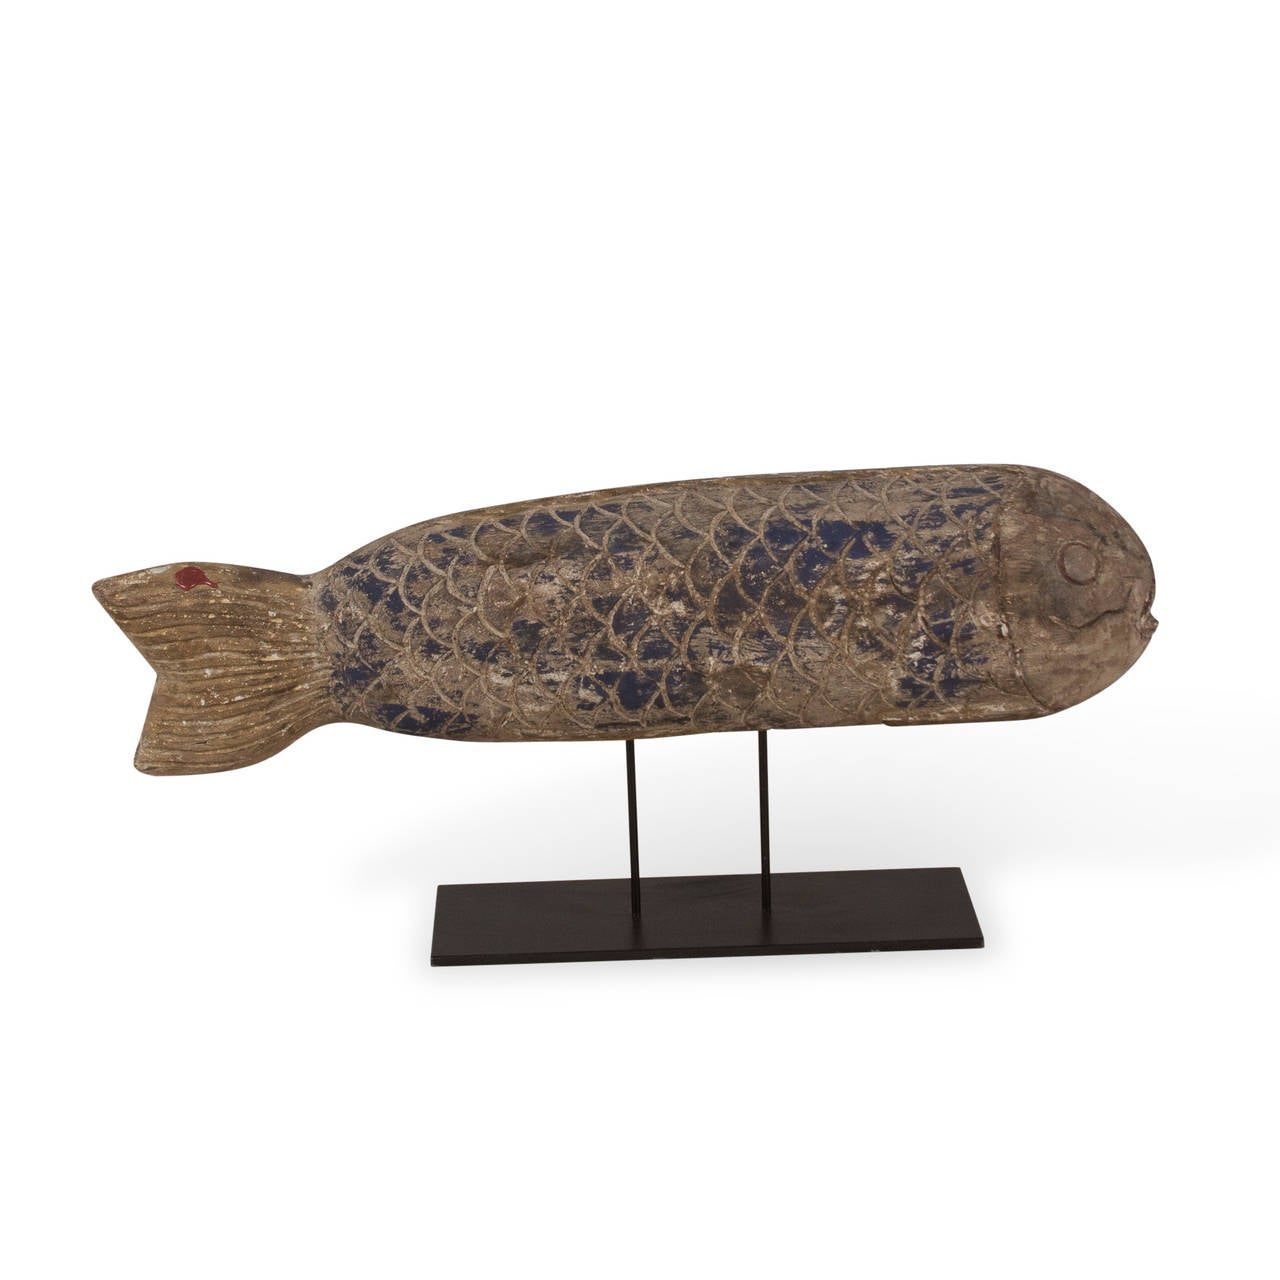 Sculptural wooden fish mounted on iron stand, carved scales, fins, eyes and mouth, some blue faded blue paint remains on body, wax seal stamp on tail, Chinese, early 20th century. Measures: Length 20 1/2 in, diameter of fish 5 1/2 in. Bottom of base